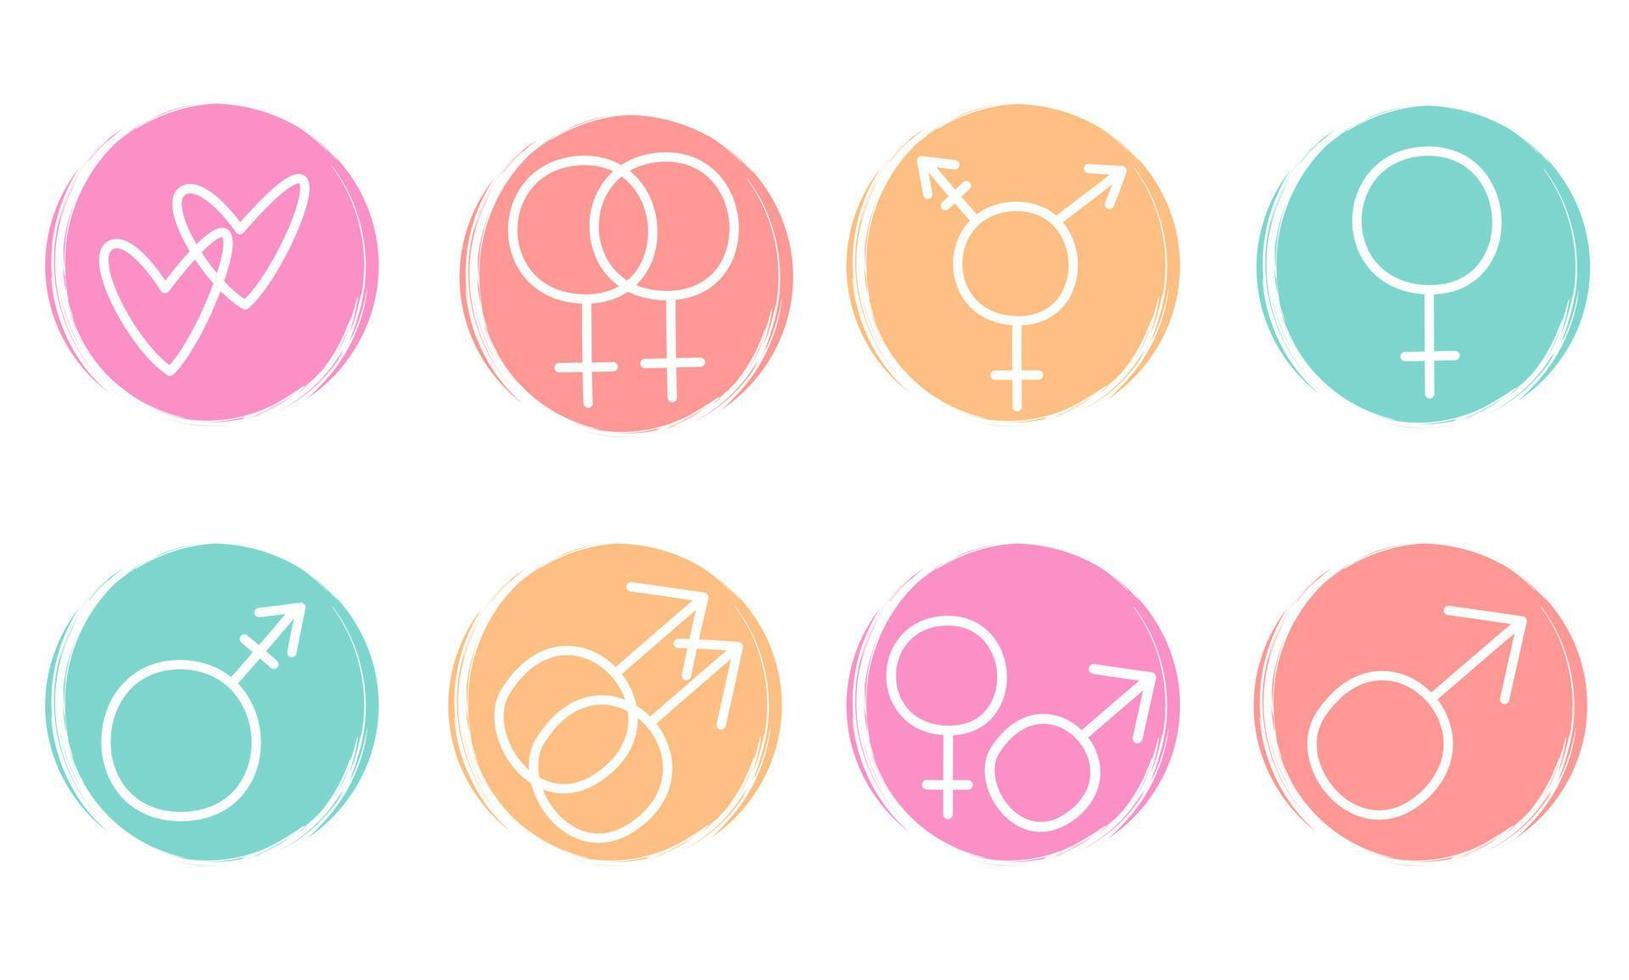 Cute vector set of logo design templates, icons and badges for social media highlights with gender symbols